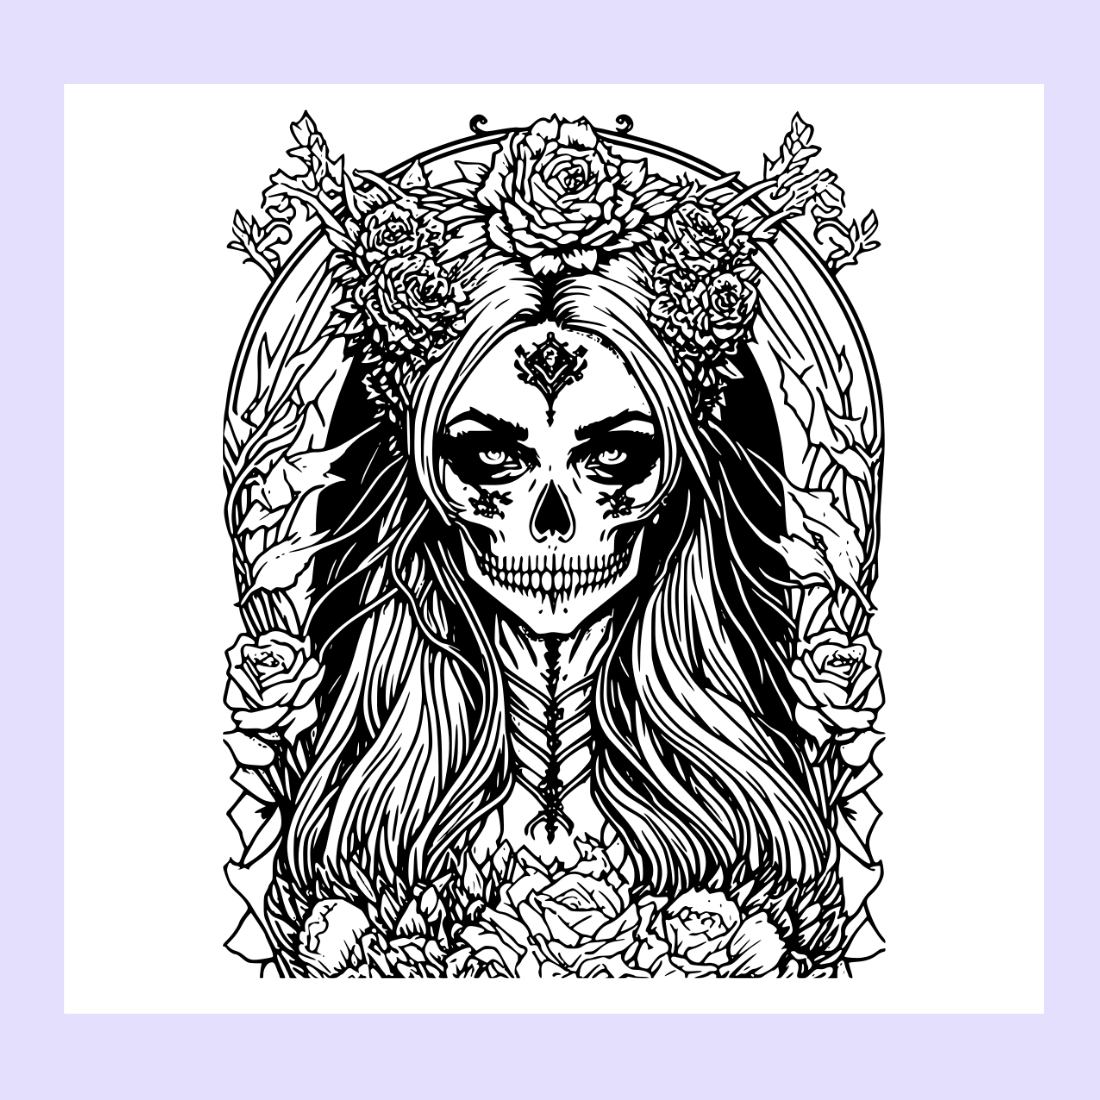 A Gothic girl with a skull and roses headdress horror and creepy, coloring pages bundle for adults preview image.